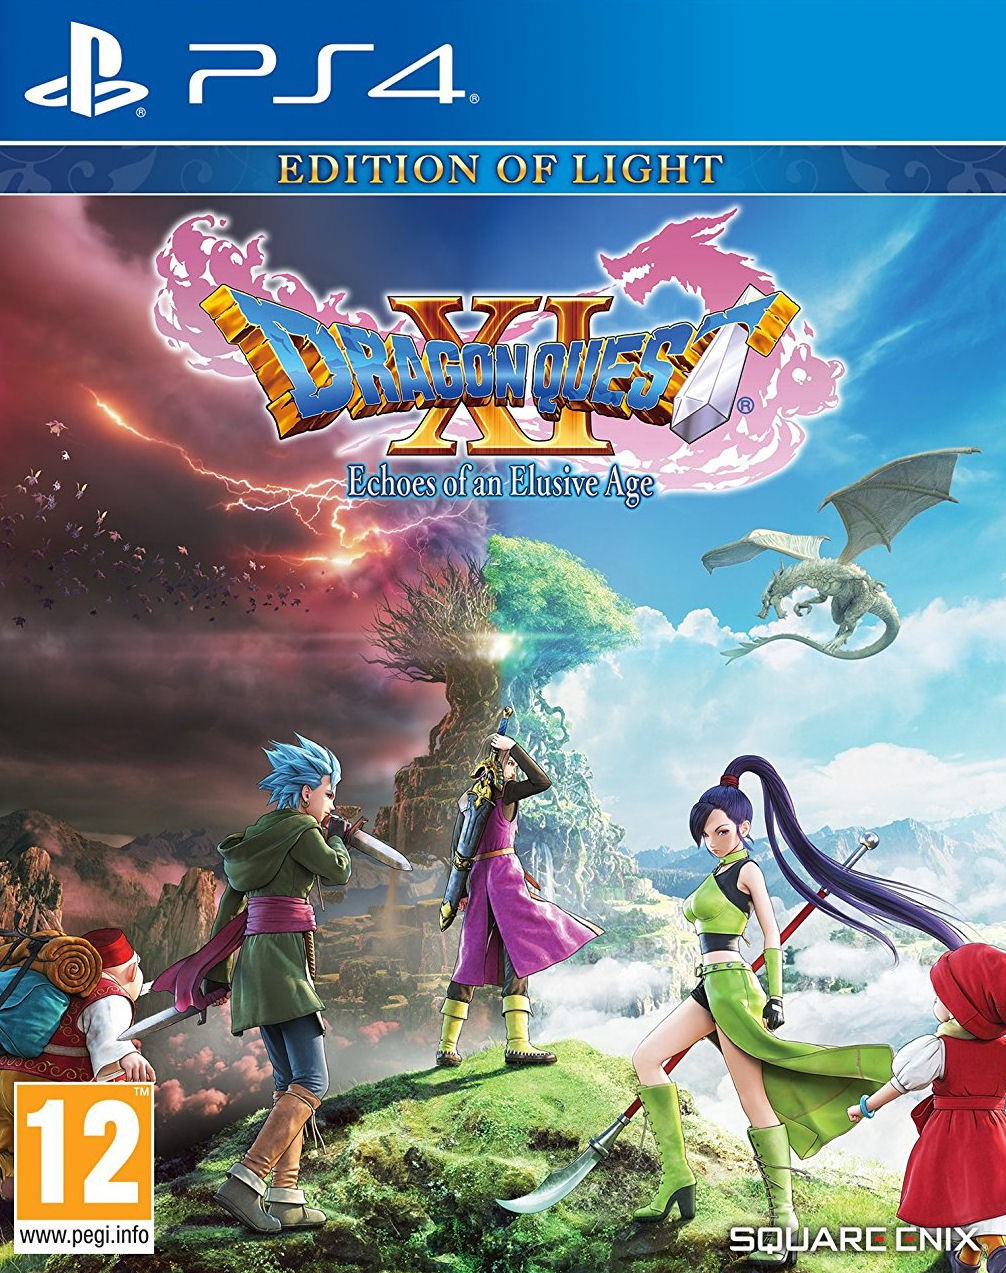 Dragon Quest XI: Echoes of an Elusive Age - Edition of Light PS4